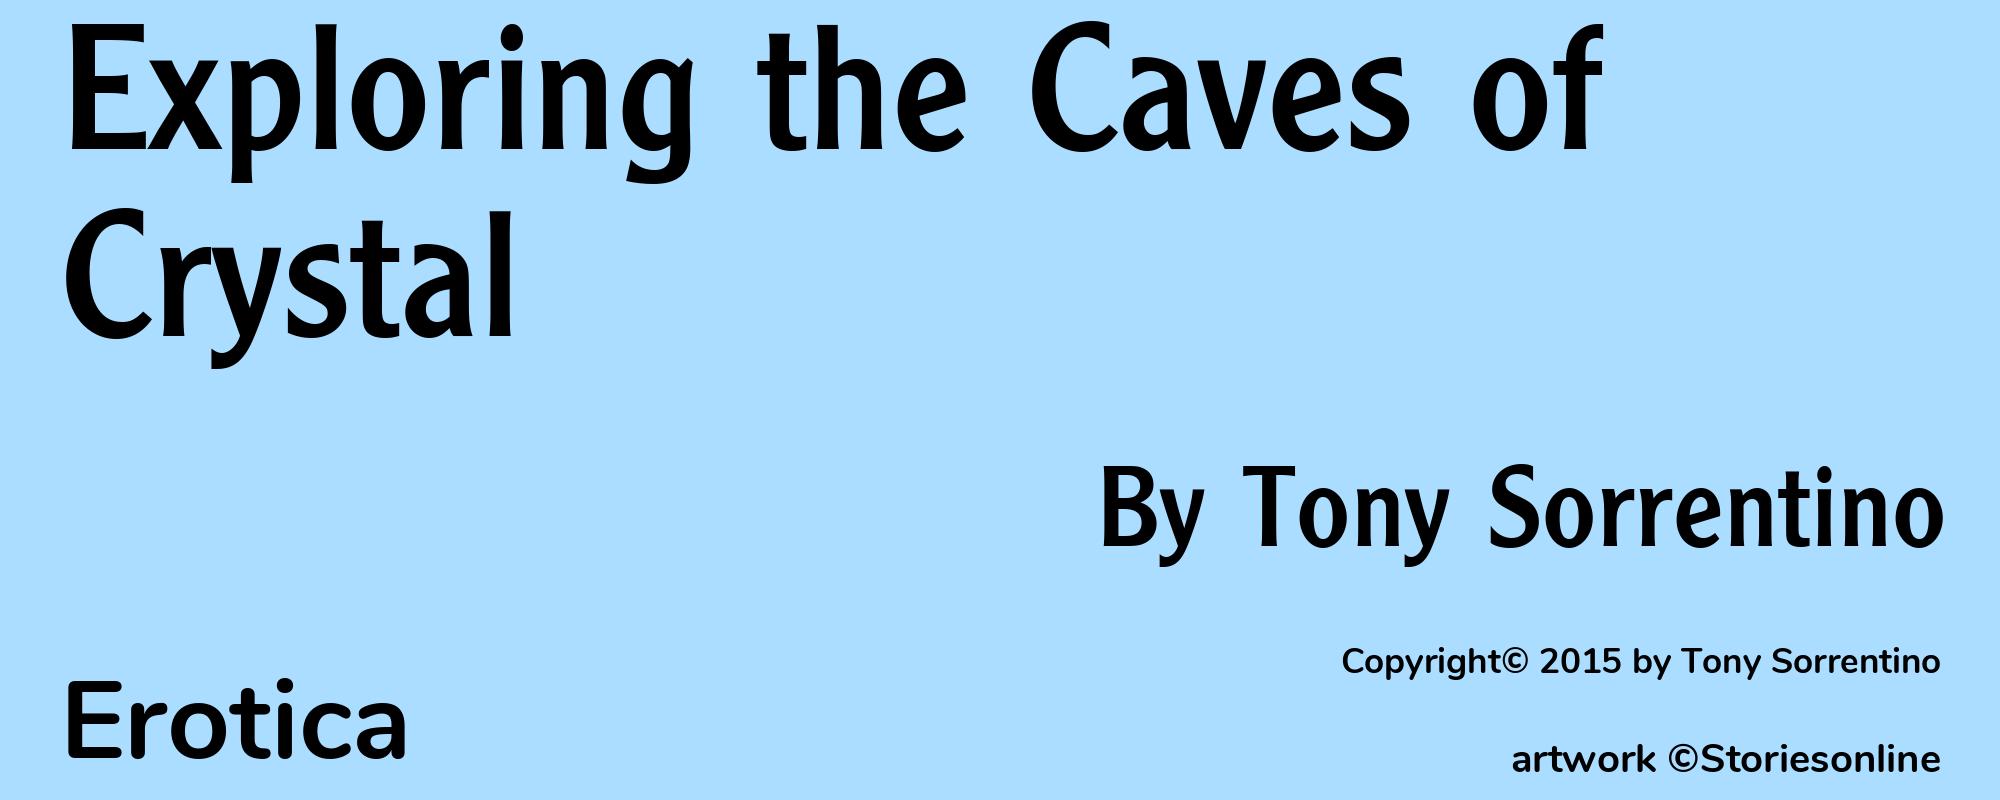 Exploring the Caves of Crystal - Cover